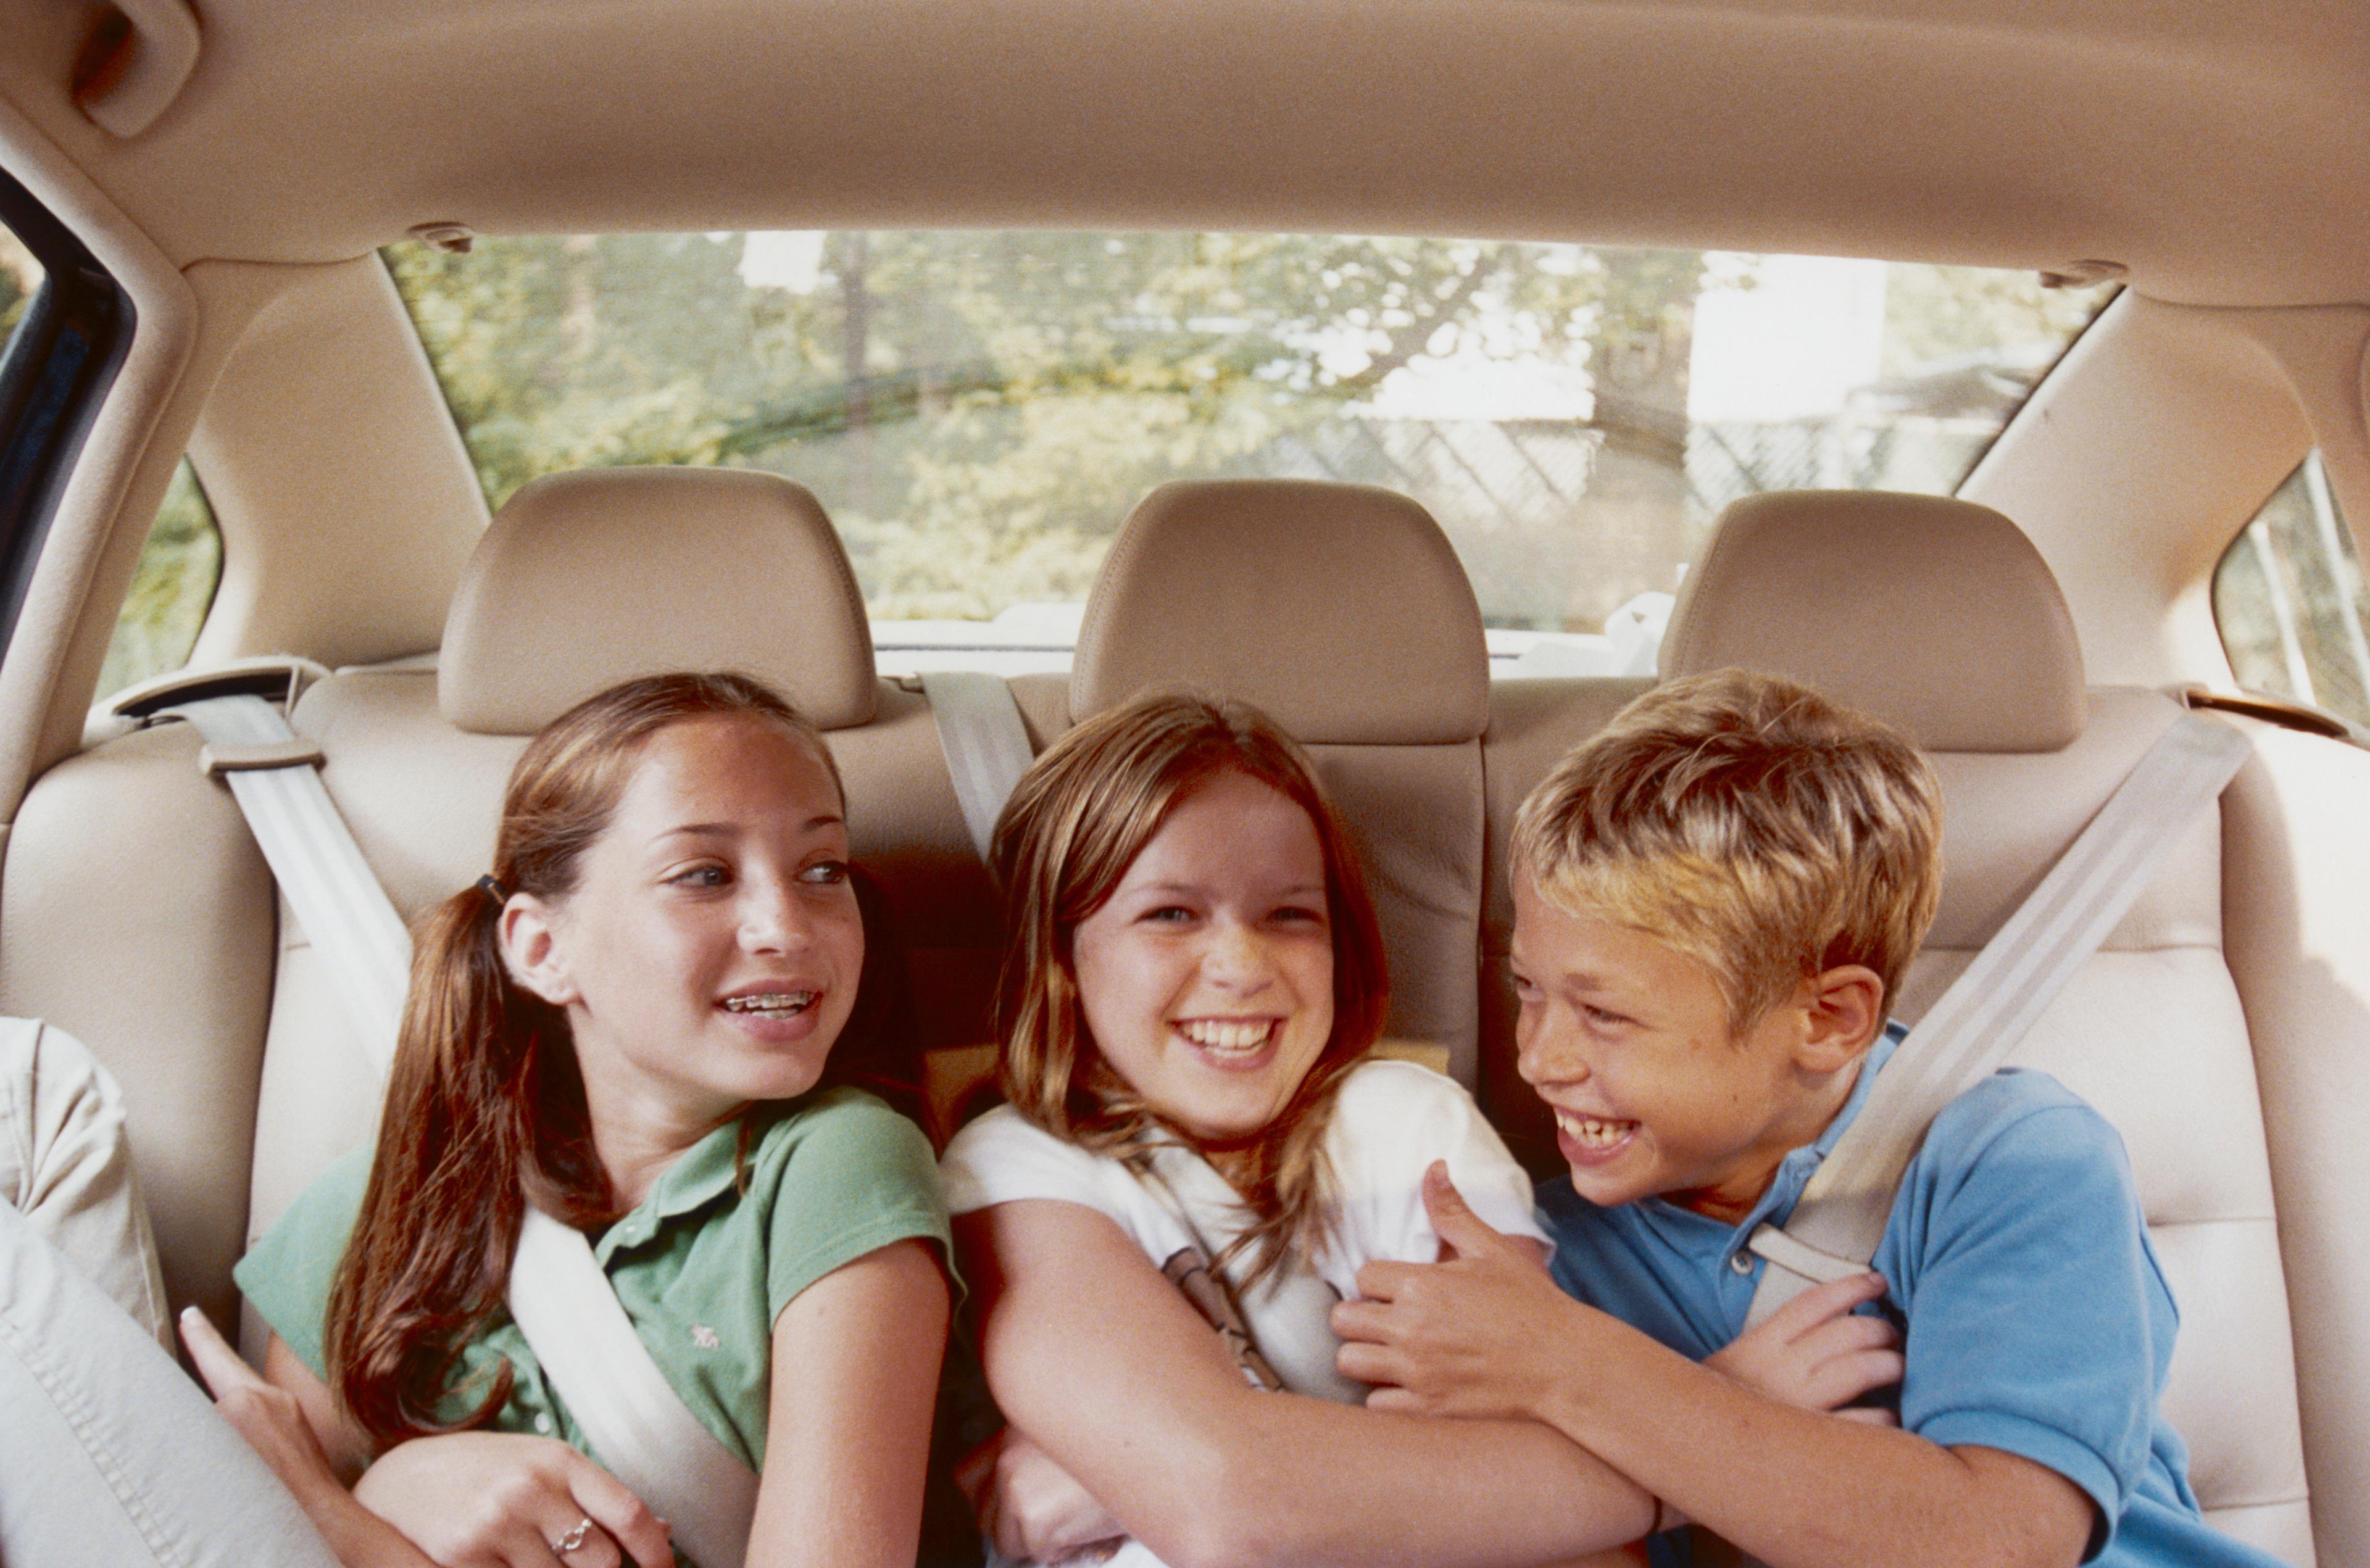 Three kids sat in the back of a car having a good time, sat on cream leather seats